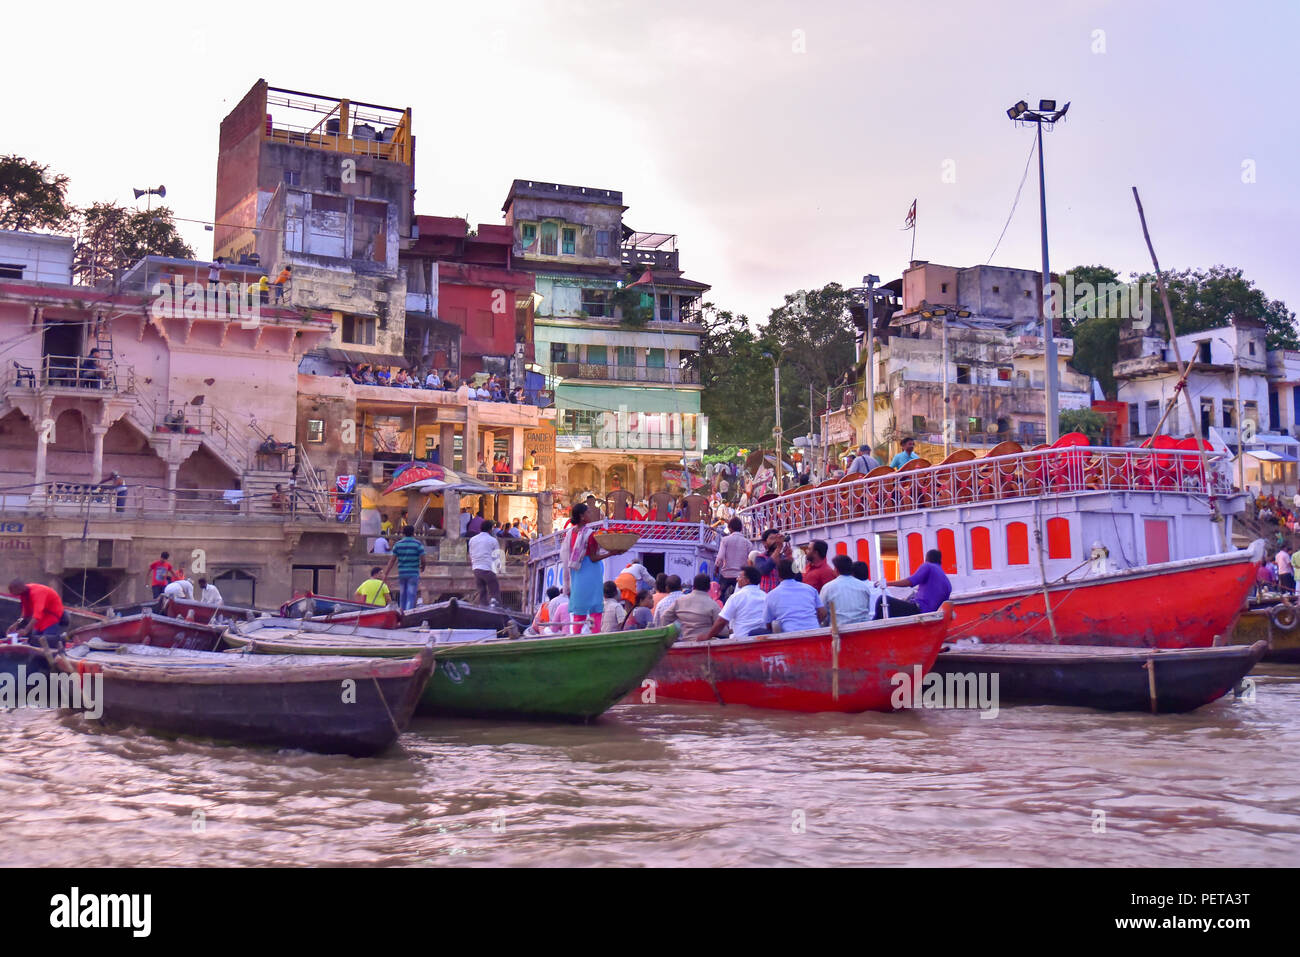 Indian people and tourists on boats at Dashashwamedh Ghat on Ganges river at evening Stock Photo